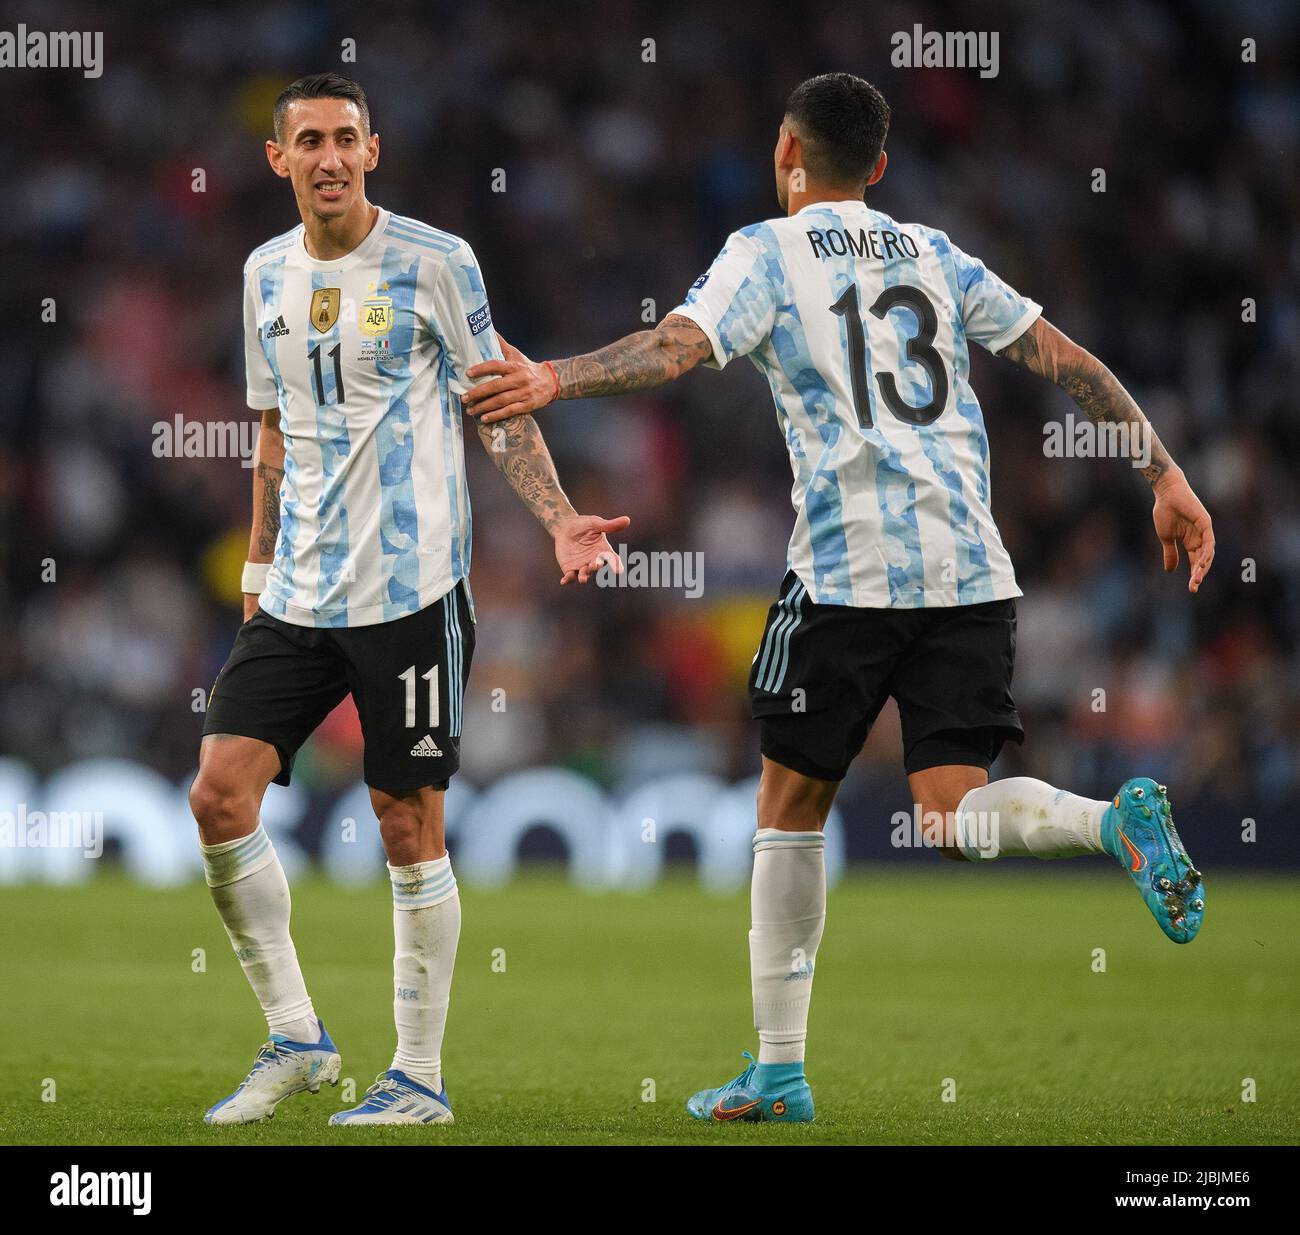 01 Jun 2022 - Italy v Argentina - Finalissima 2022 - Wembley Stadium  Argentina's Angel Di Maria and Cristian Romero during the match against Italy at Stock Photo